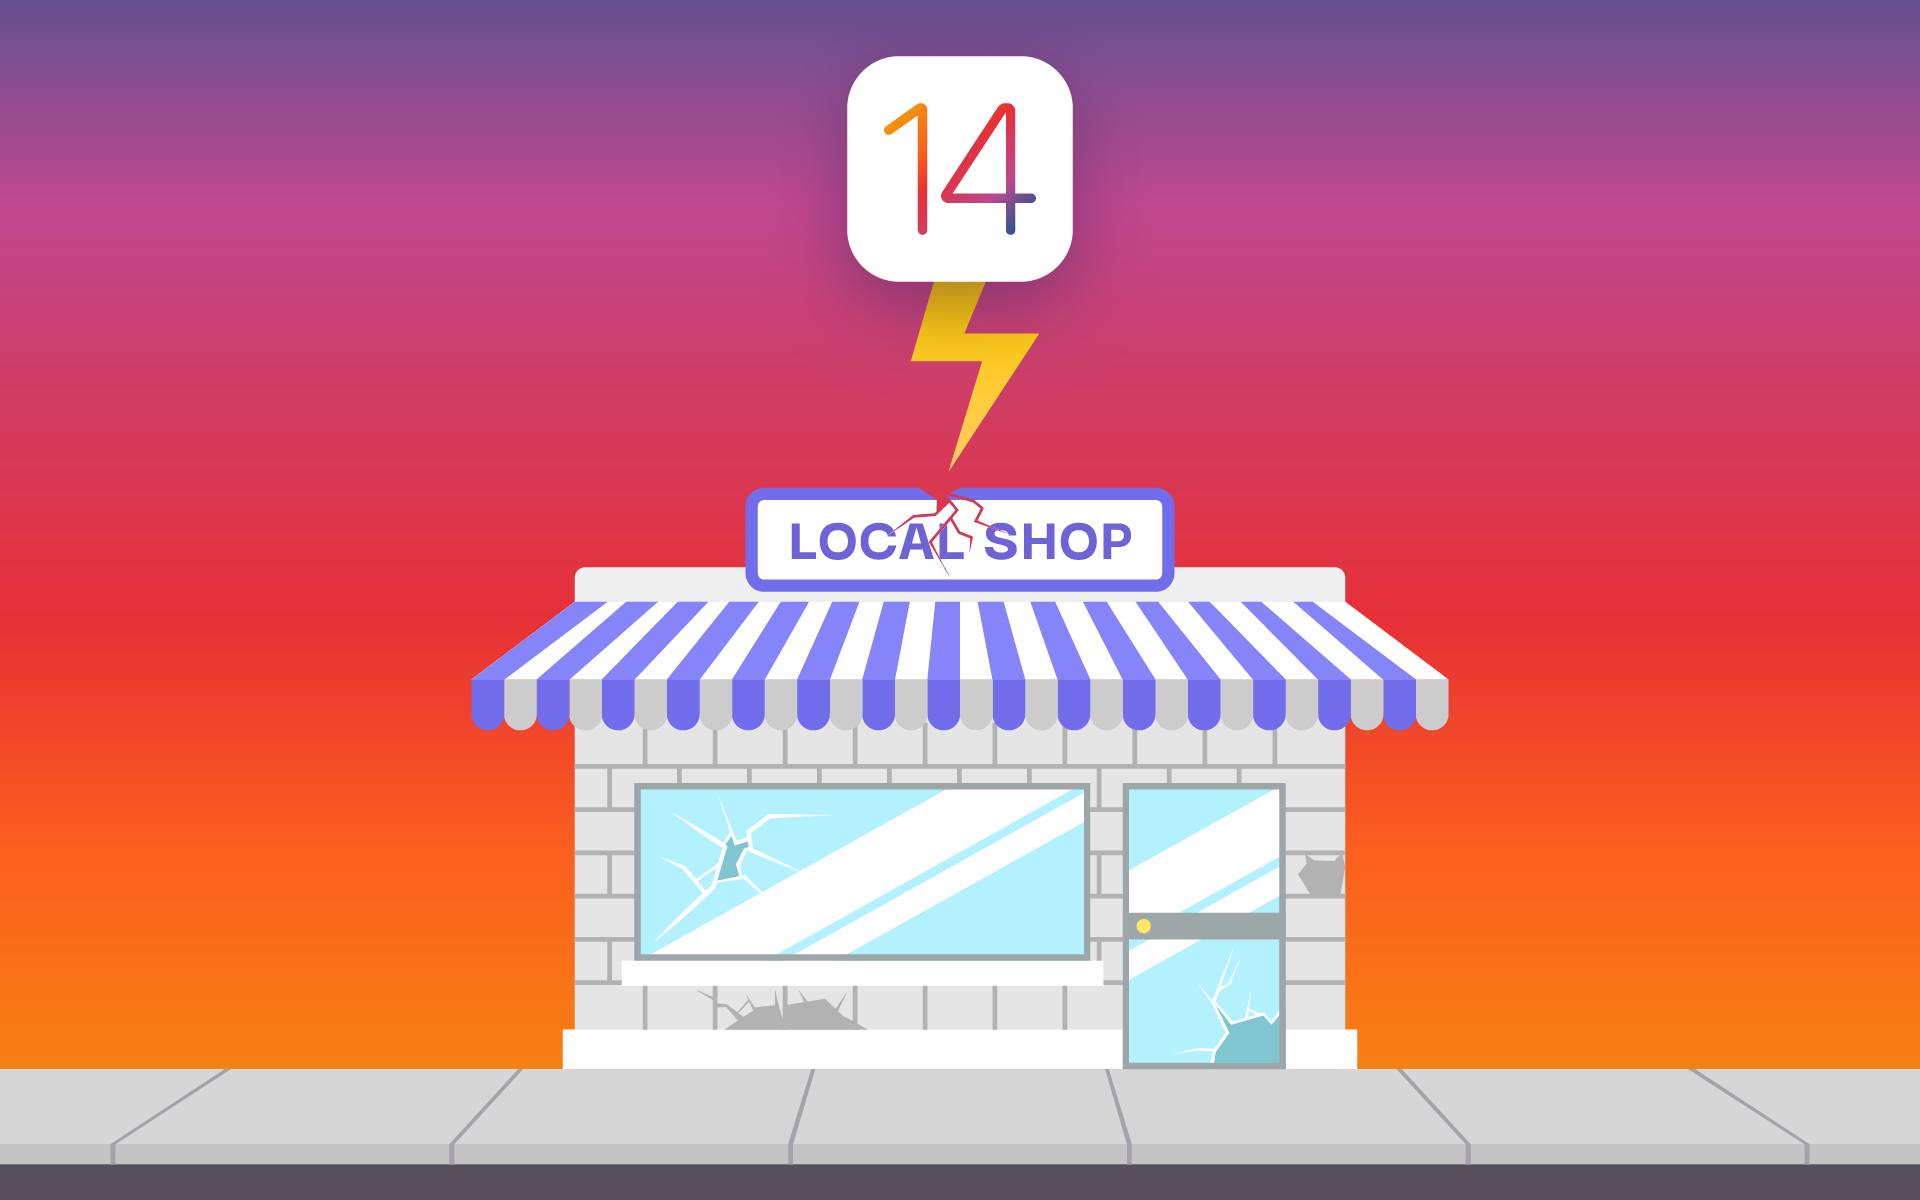 iOS14 changes are hurting small businesses